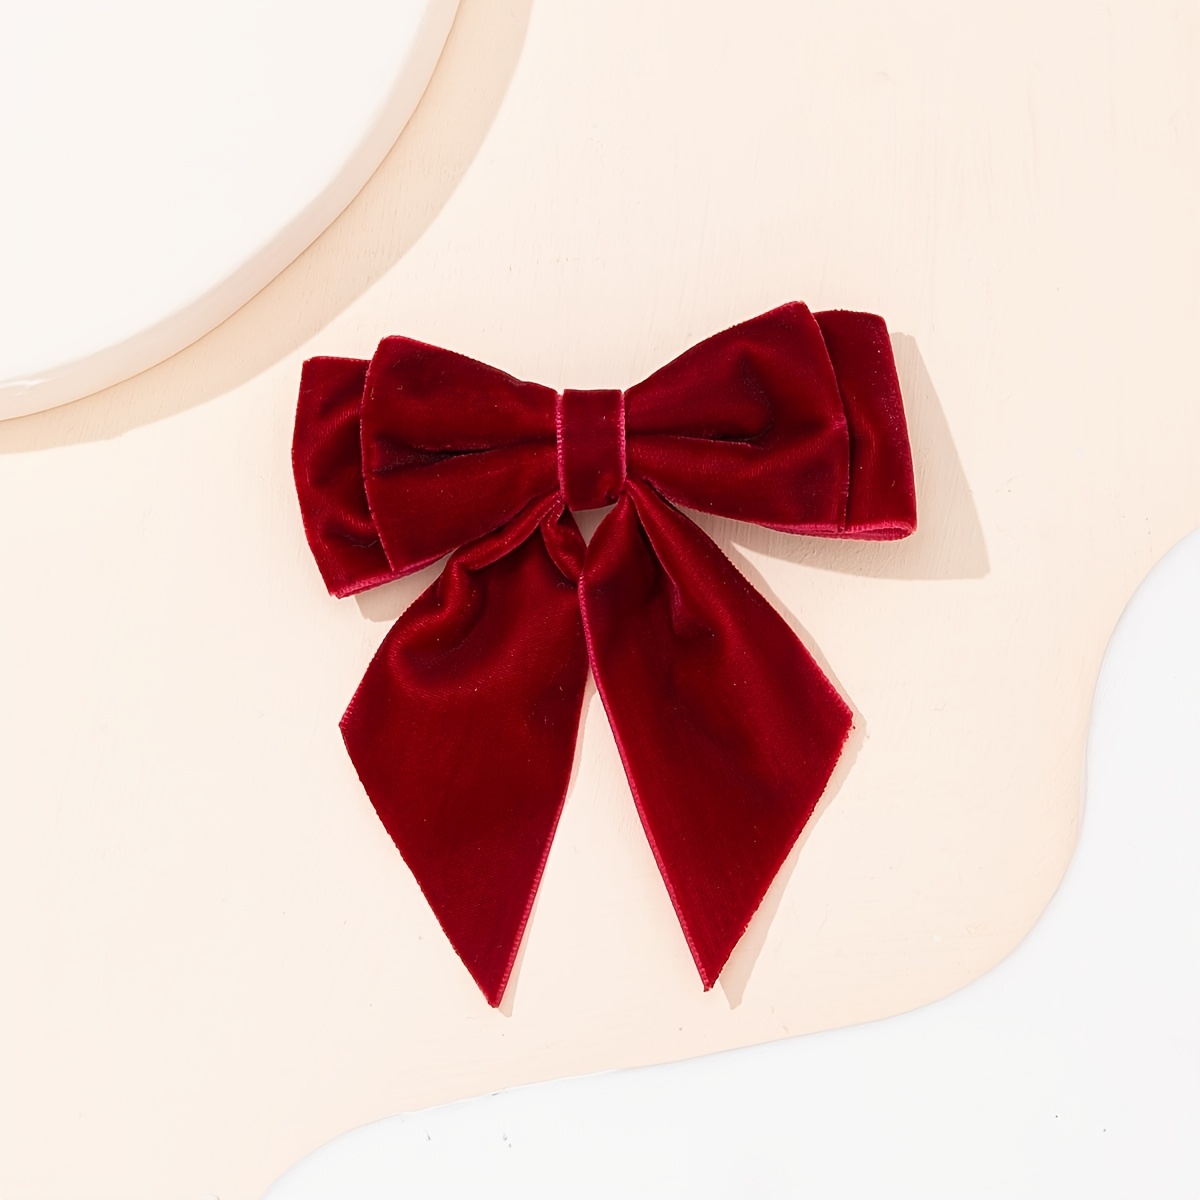 Elegant Simple Velvet Bow Tie Brooch Pins Bowknot Female College Style  Shirt Collar Brooches For Women, Free Shipping For New Users